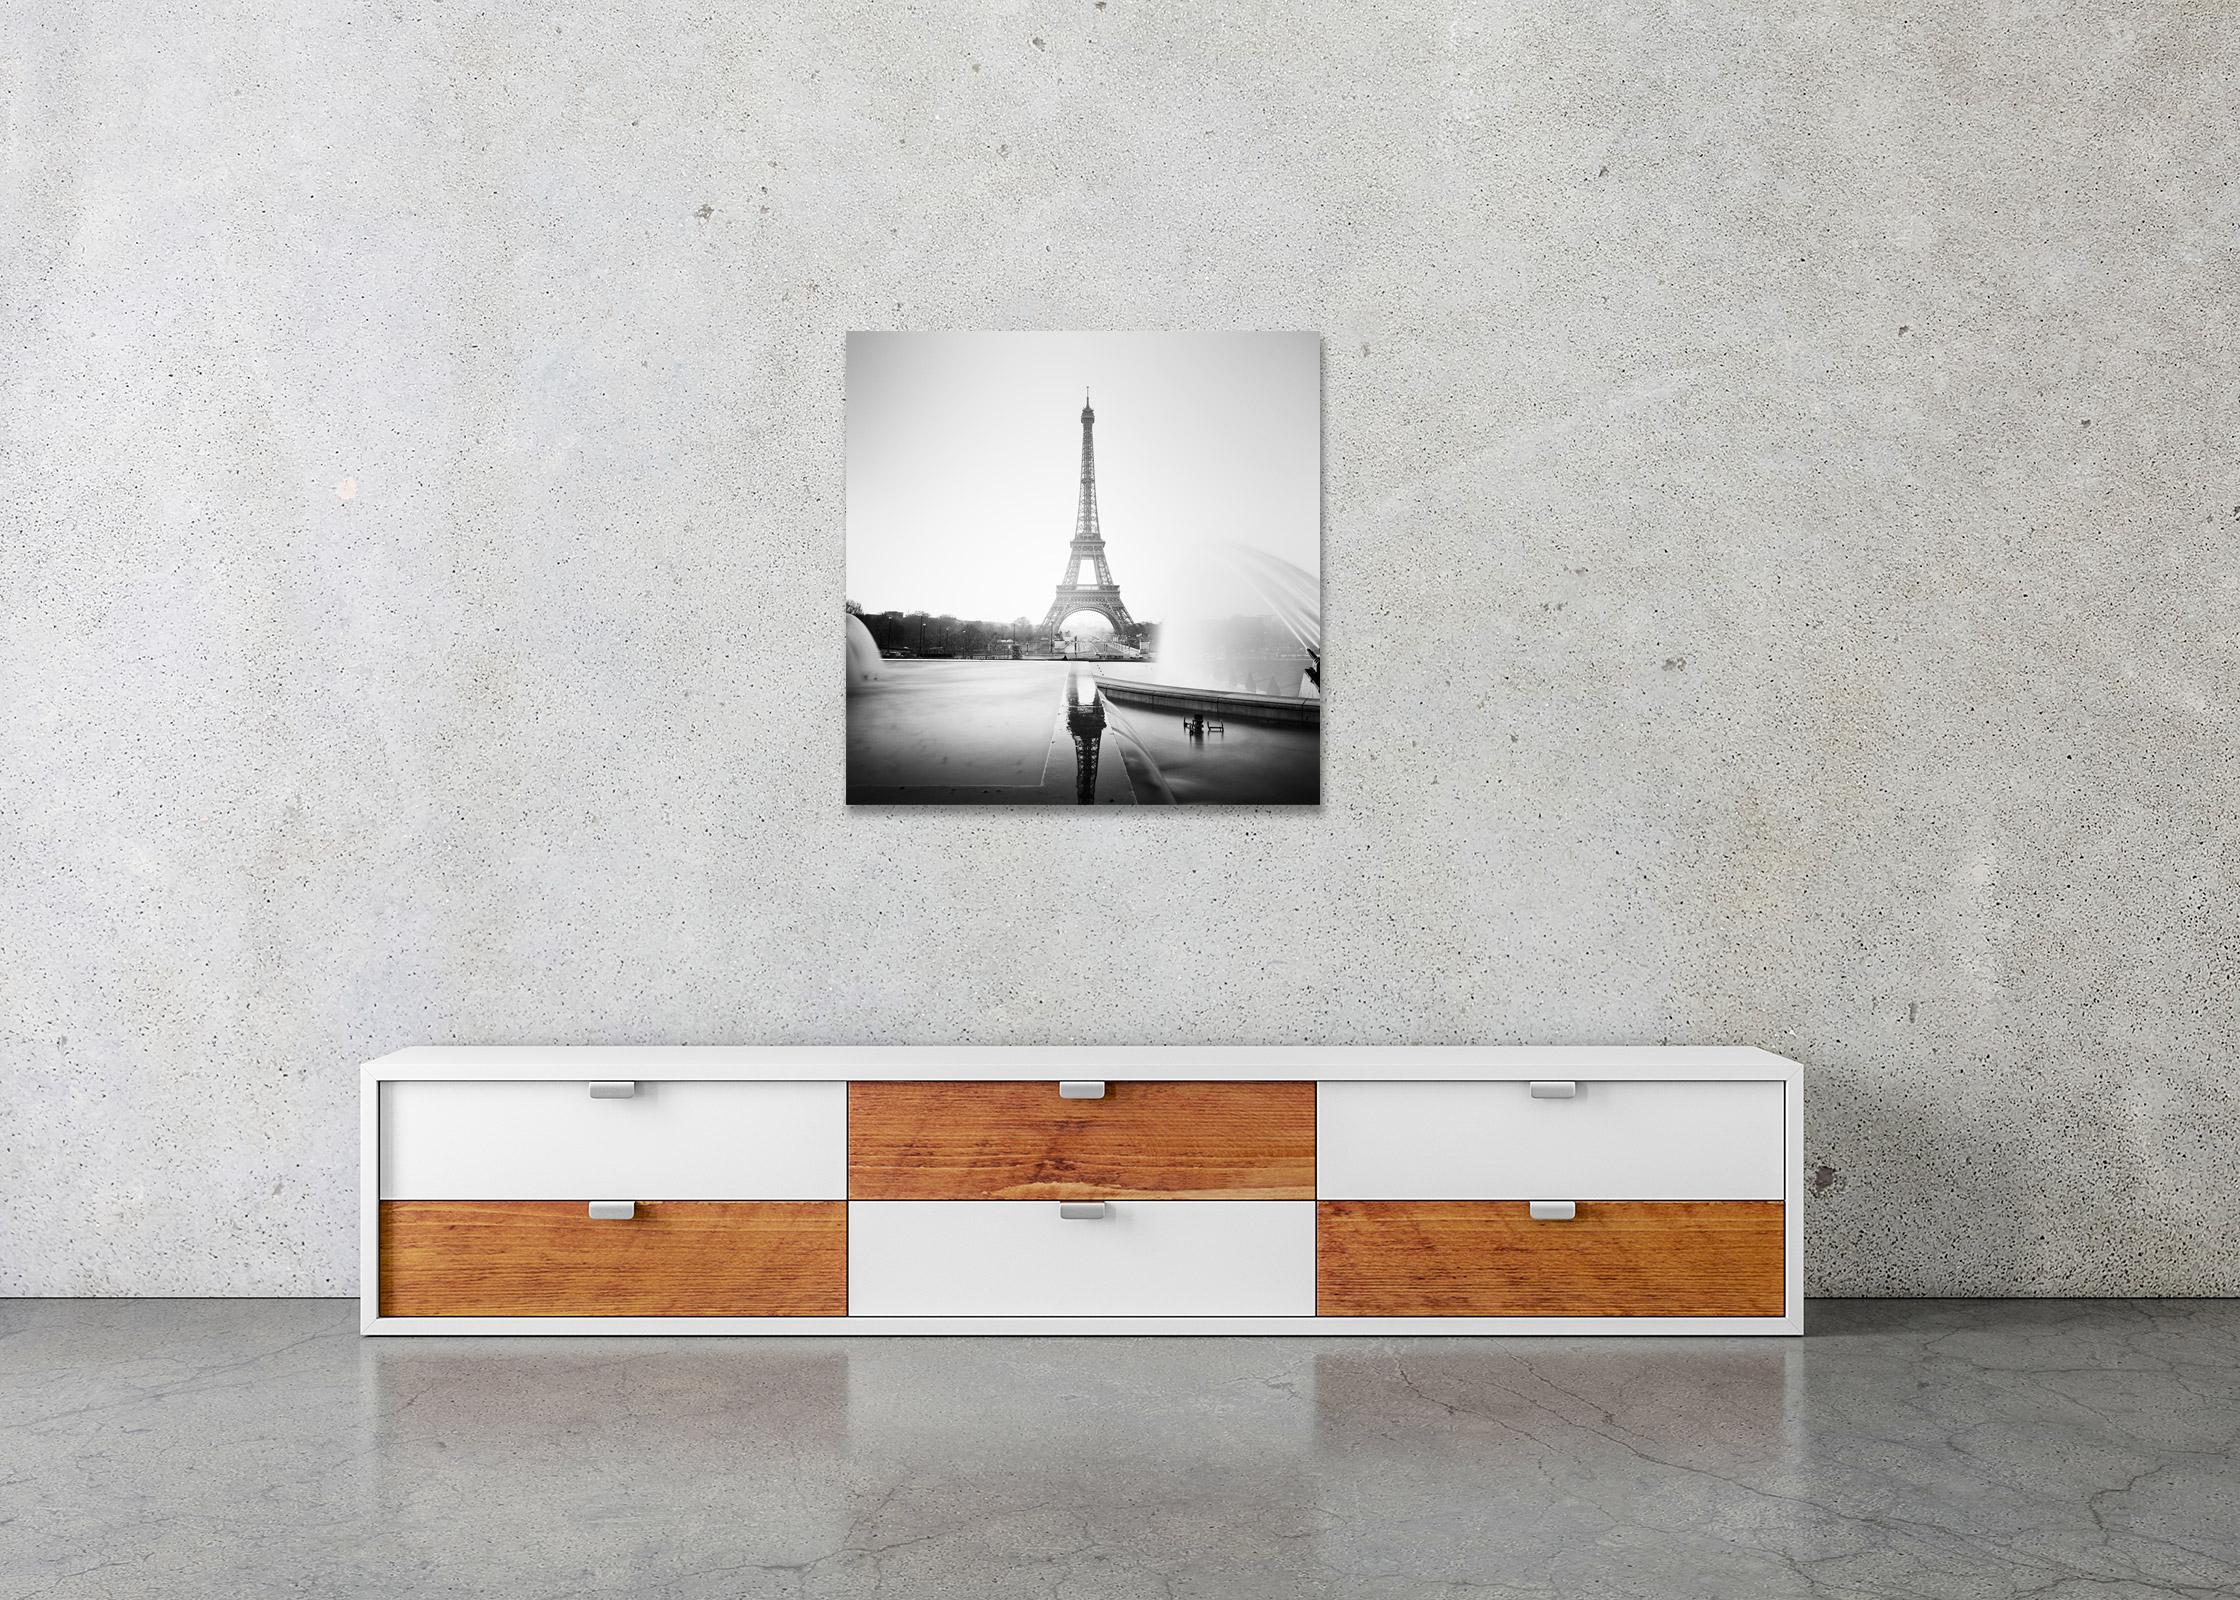 Eiffel Tower fontaine du trocadero Paris, black and white cityscape photography - Gray Landscape Photograph by Gerald Berghammer, Ina Forstinger